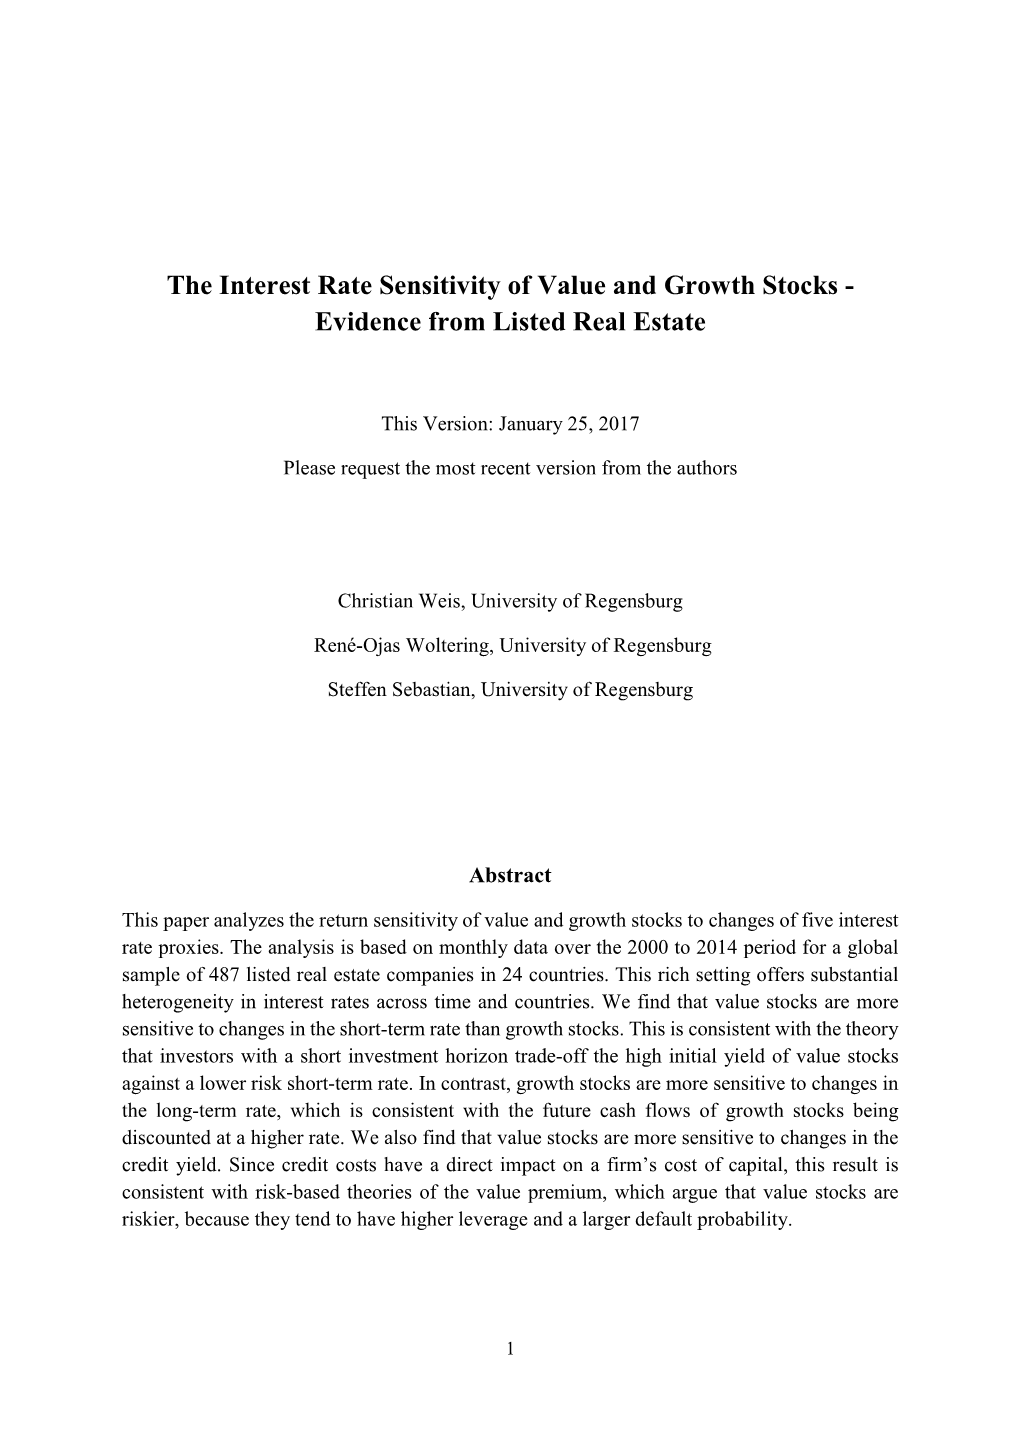 The Interest Rate Sensitivity of Value and Growth Stocks - Evidence from Listed Real Estate